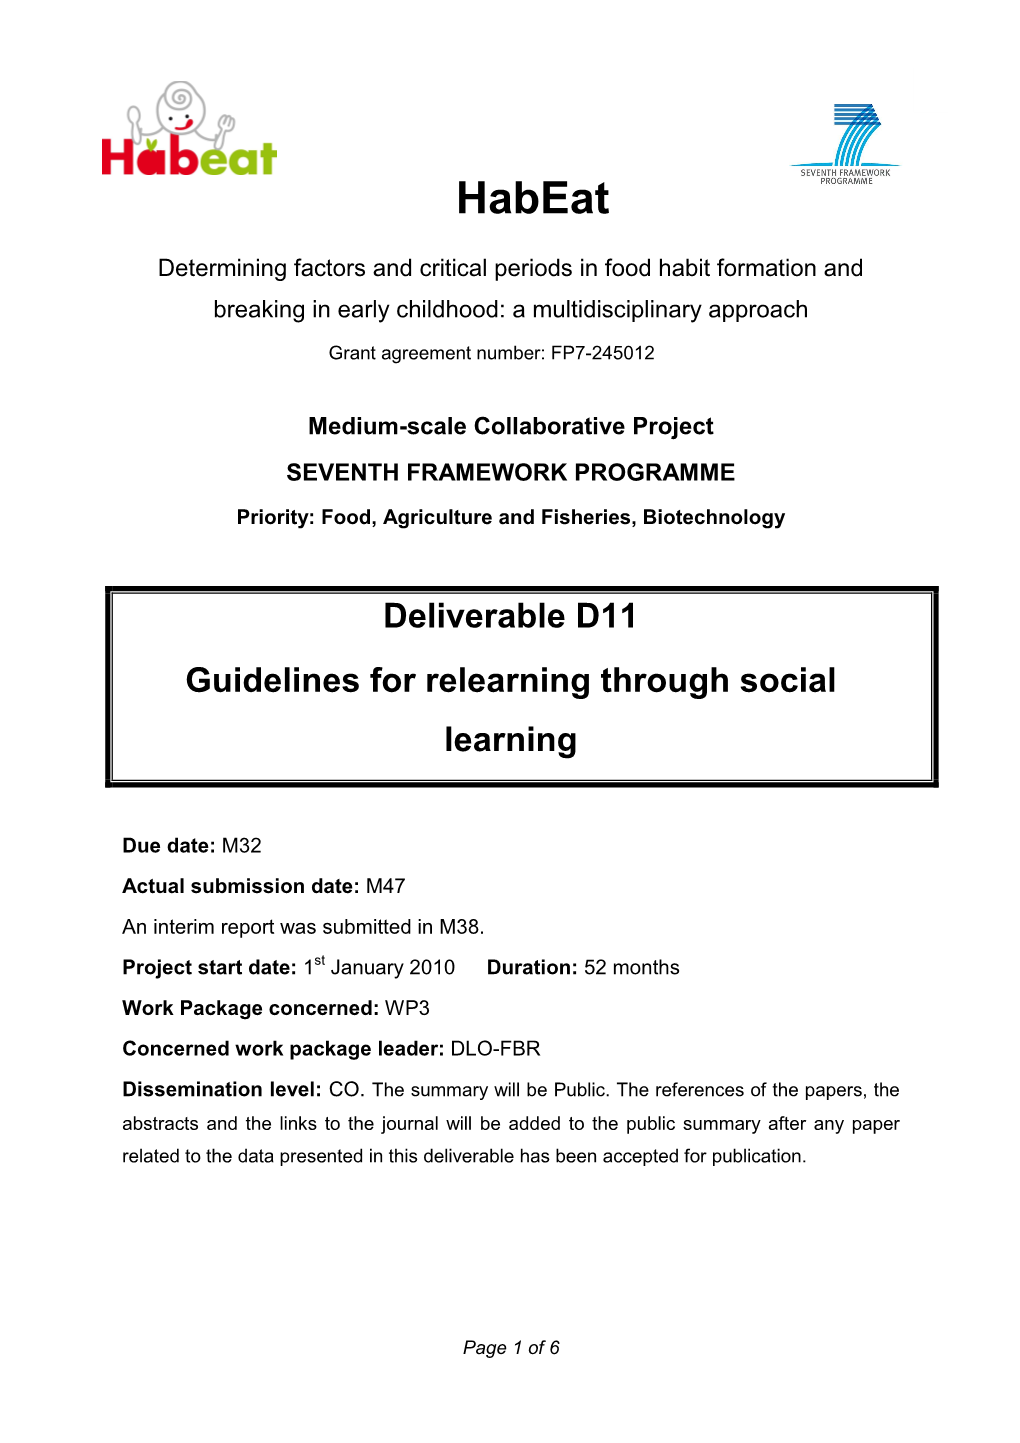 Deliverable D11 Guidelines for Relearning Through Social Learning